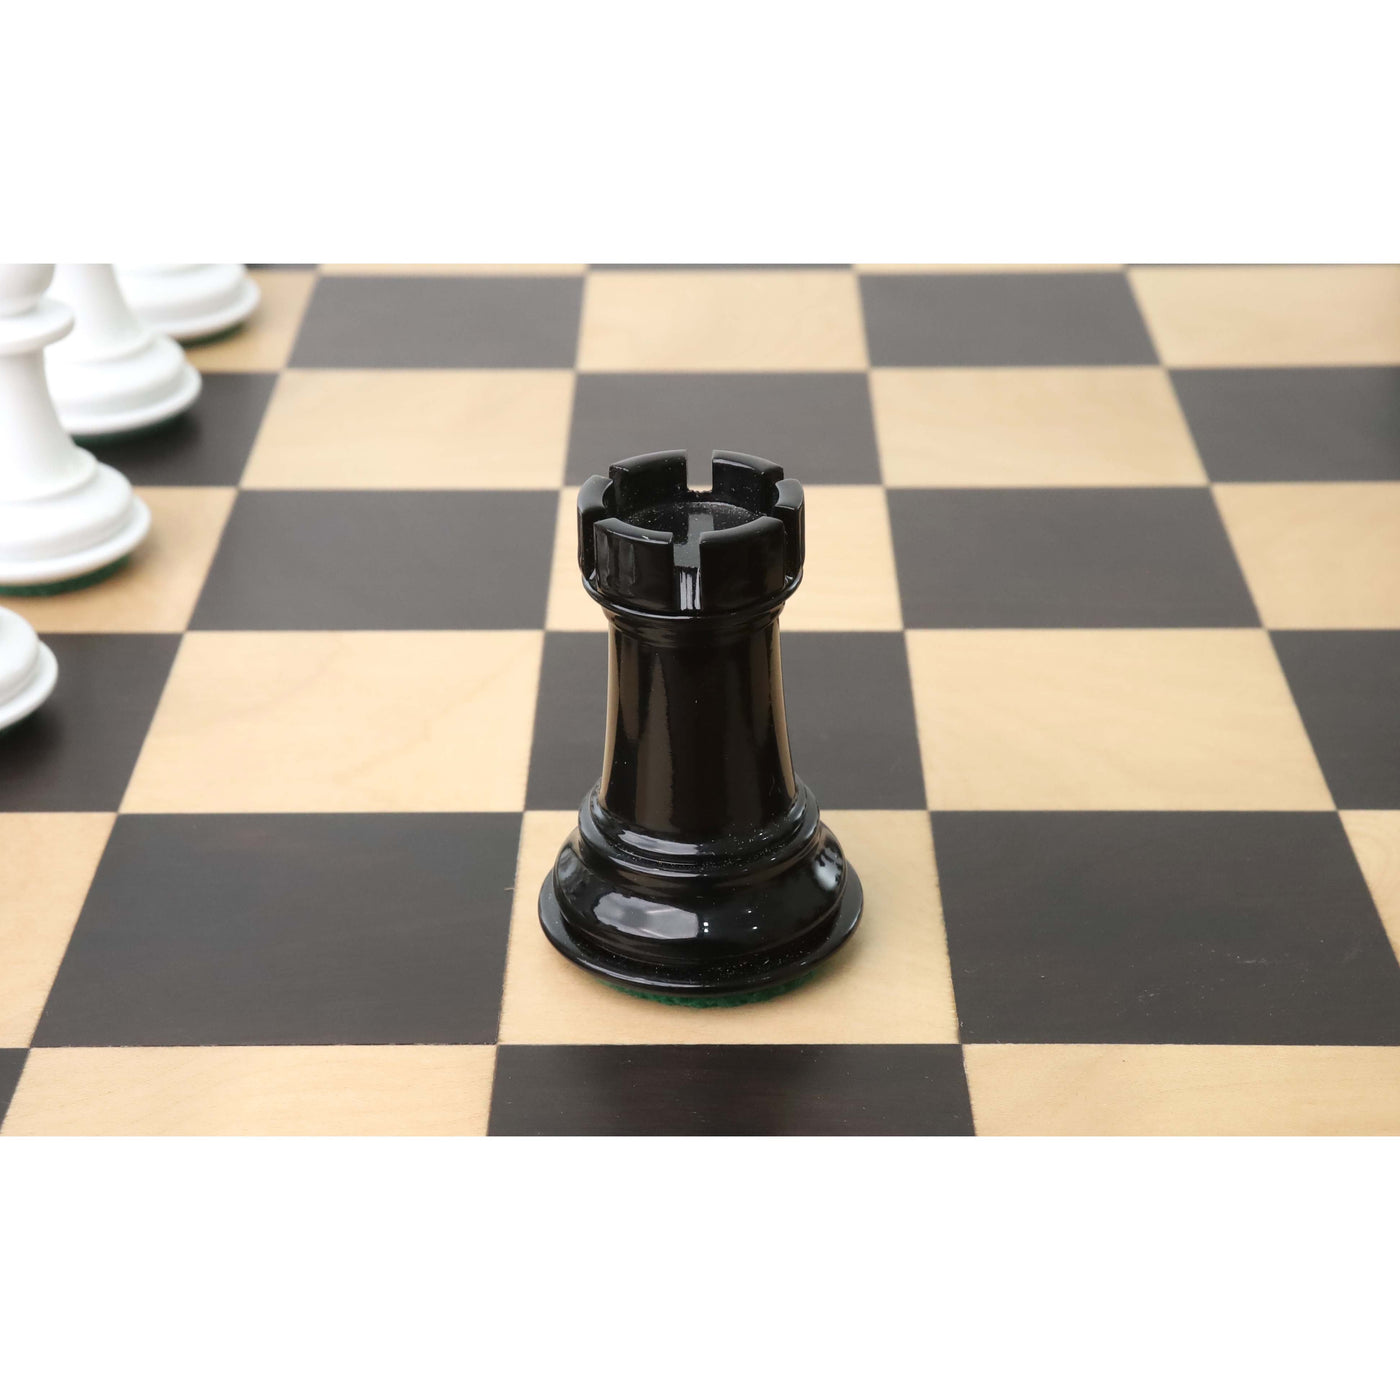 1940s' Soviet Reproduced Chess Set - Chess Pieces Only - Black and White Lacquer Boxwood